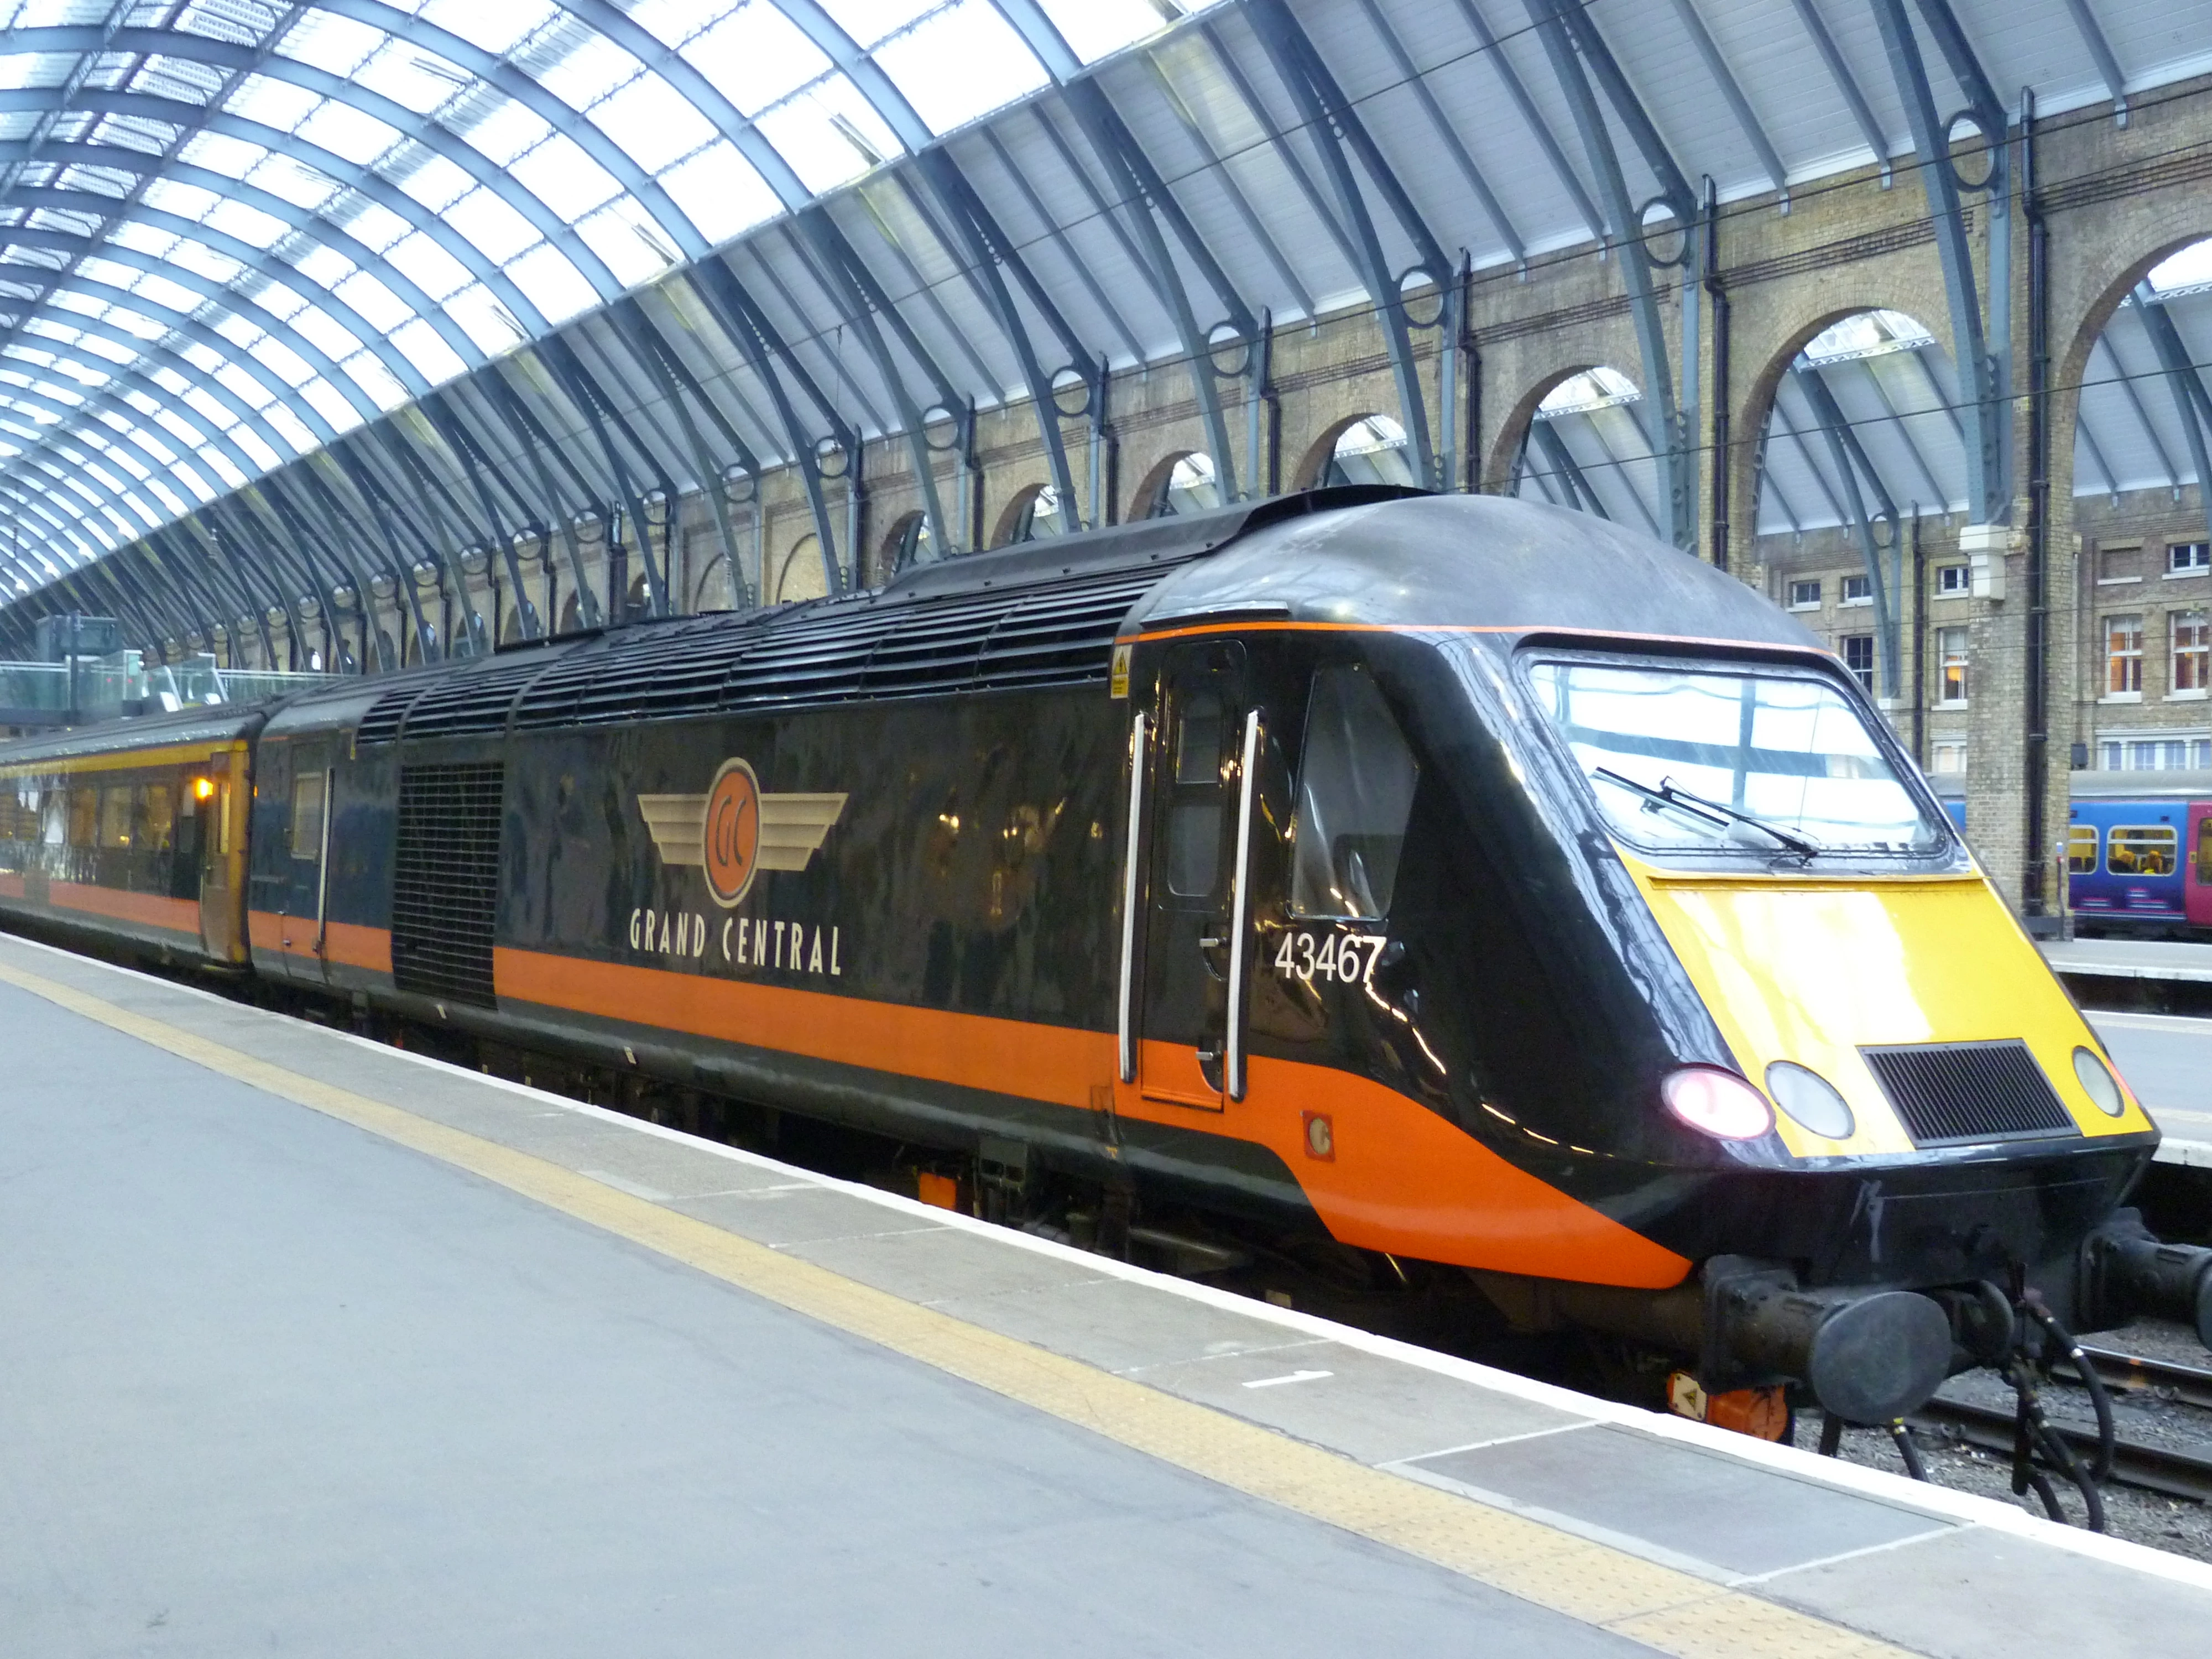 Grand Central loco 43467 at Kings Cross